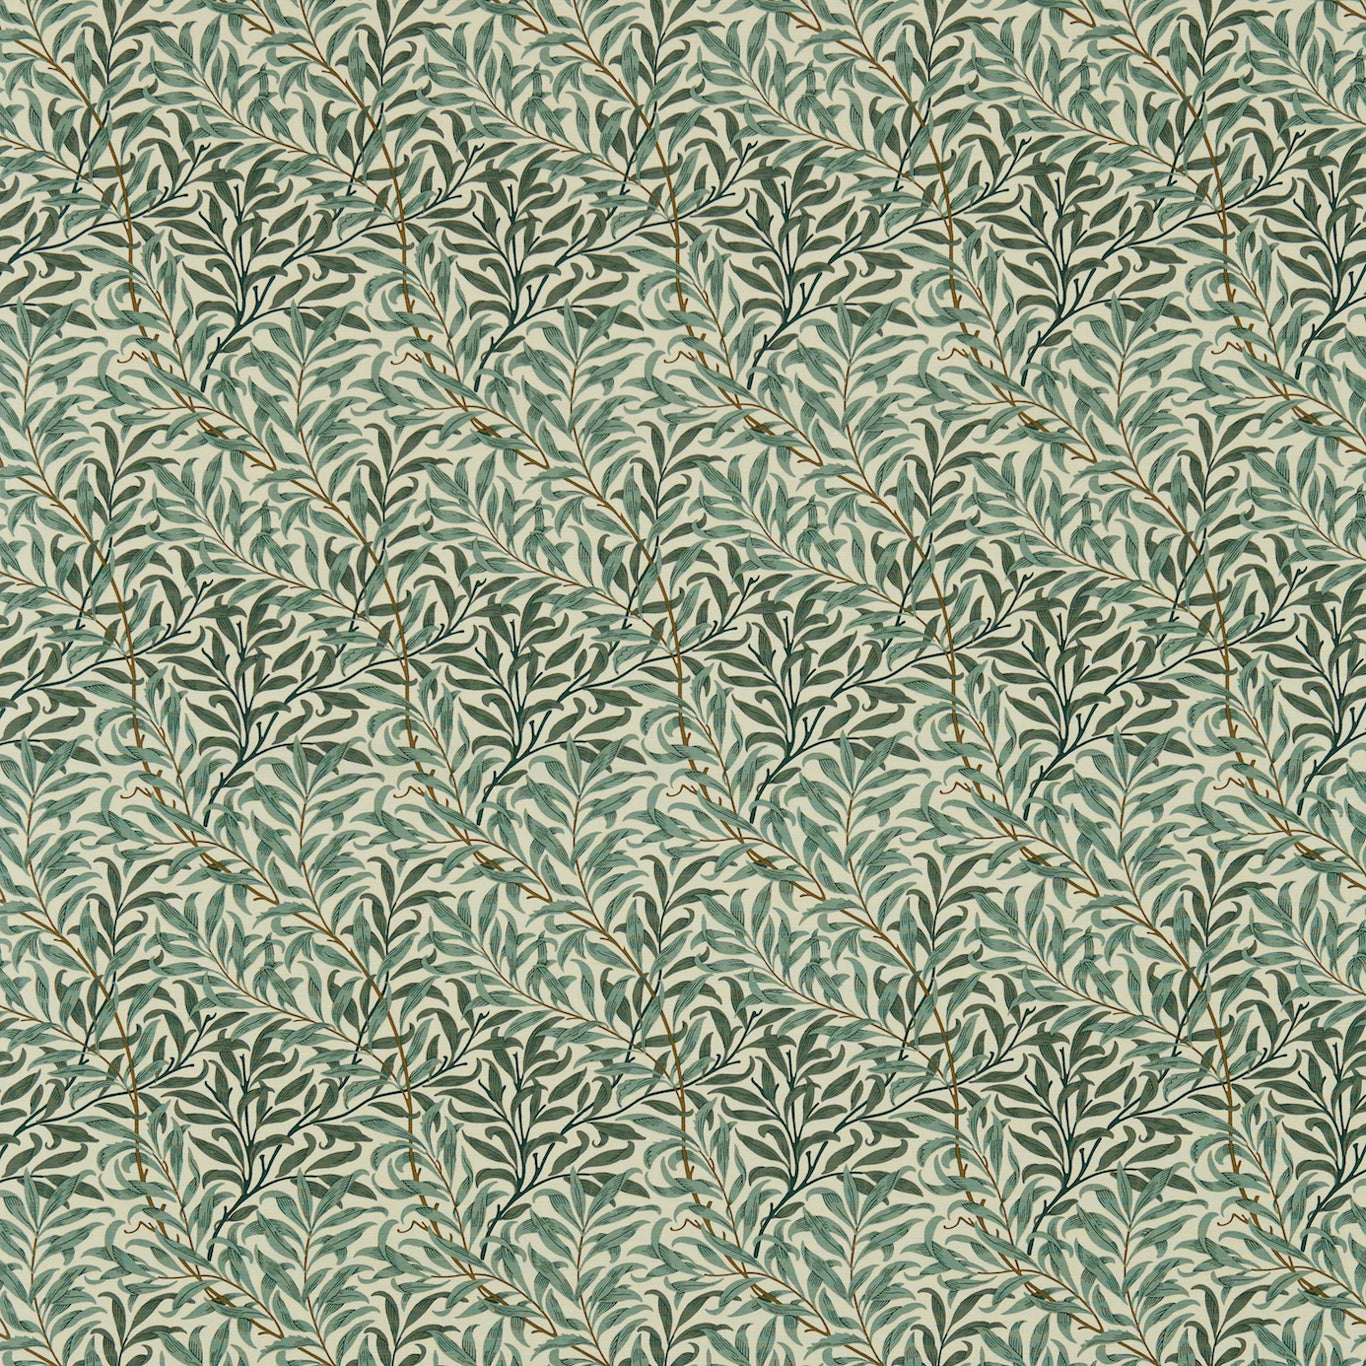 WILLOW BOUGHS CREAM/GREEN Fabric By Morris & Co